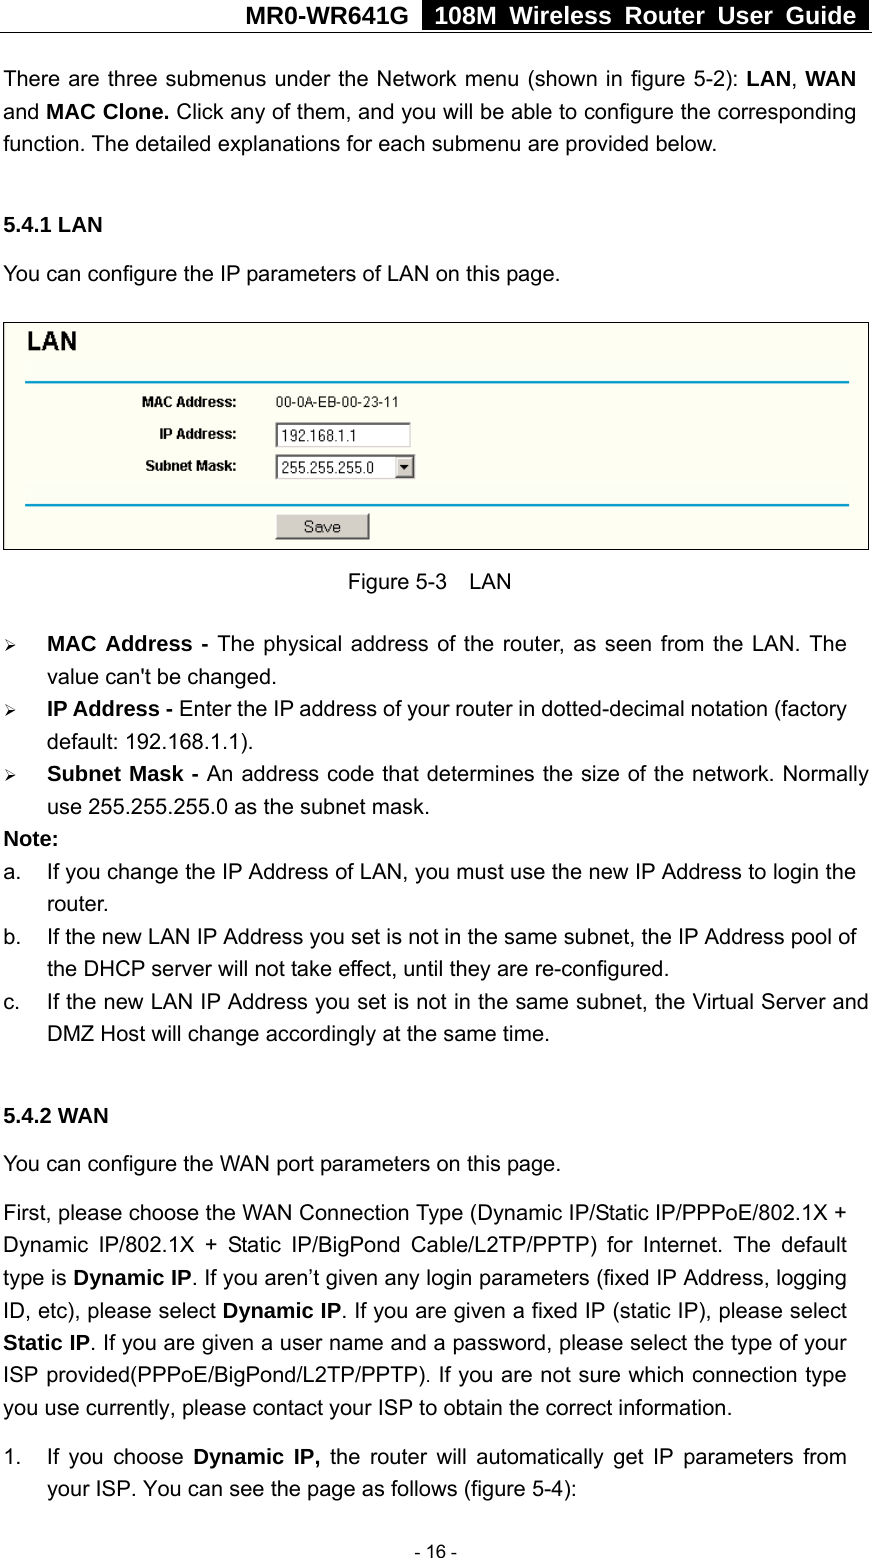 MR0-WR641G   108M Wireless Router User Guide  There are three submenus under the Network menu (shown in figure 5-2): LAN, WAN and MAC Clone. Click any of them, and you will be able to configure the corresponding function. The detailed explanations for each submenu are provided below.  5.4.1 LAN You can configure the IP parameters of LAN on this page.    Figure 5-3  LAN ¾ MAC Address - The physical address of the router, as seen from the LAN. The value can&apos;t be changed. ¾ IP Address - Enter the IP address of your router in dotted-decimal notation (factory default: 192.168.1.1). ¾ Subnet Mask - An address code that determines the size of the network. Normally use 255.255.255.0 as the subnet mask.   Note:  a.  If you change the IP Address of LAN, you must use the new IP Address to login the router.  b.  If the new LAN IP Address you set is not in the same subnet, the IP Address pool of the DHCP server will not take effect, until they are re-configured. c.  If the new LAN IP Address you set is not in the same subnet, the Virtual Server and DMZ Host will change accordingly at the same time.  5.4.2 WAN You can configure the WAN port parameters on this page. First, please choose the WAN Connection Type (Dynamic IP/Static IP/PPPoE/802.1X + Dynamic IP/802.1X + Static IP/BigPond Cable/L2TP/PPTP) for Internet. The default type is Dynamic IP. If you aren’t given any login parameters (fixed IP Address, logging ID, etc), please select Dynamic IP. If you are given a fixed IP (static IP), please select Static IP. If you are given a user name and a password, please select the type of your ISP provided(PPPoE/BigPond/L2TP/PPTP). If you are not sure which connection type you use currently, please contact your ISP to obtain the correct information. 1. If you choose Dynamic IP, the router will automatically get IP parameters from your ISP. You can see the page as follows (figure 5-4):  - 16 - 